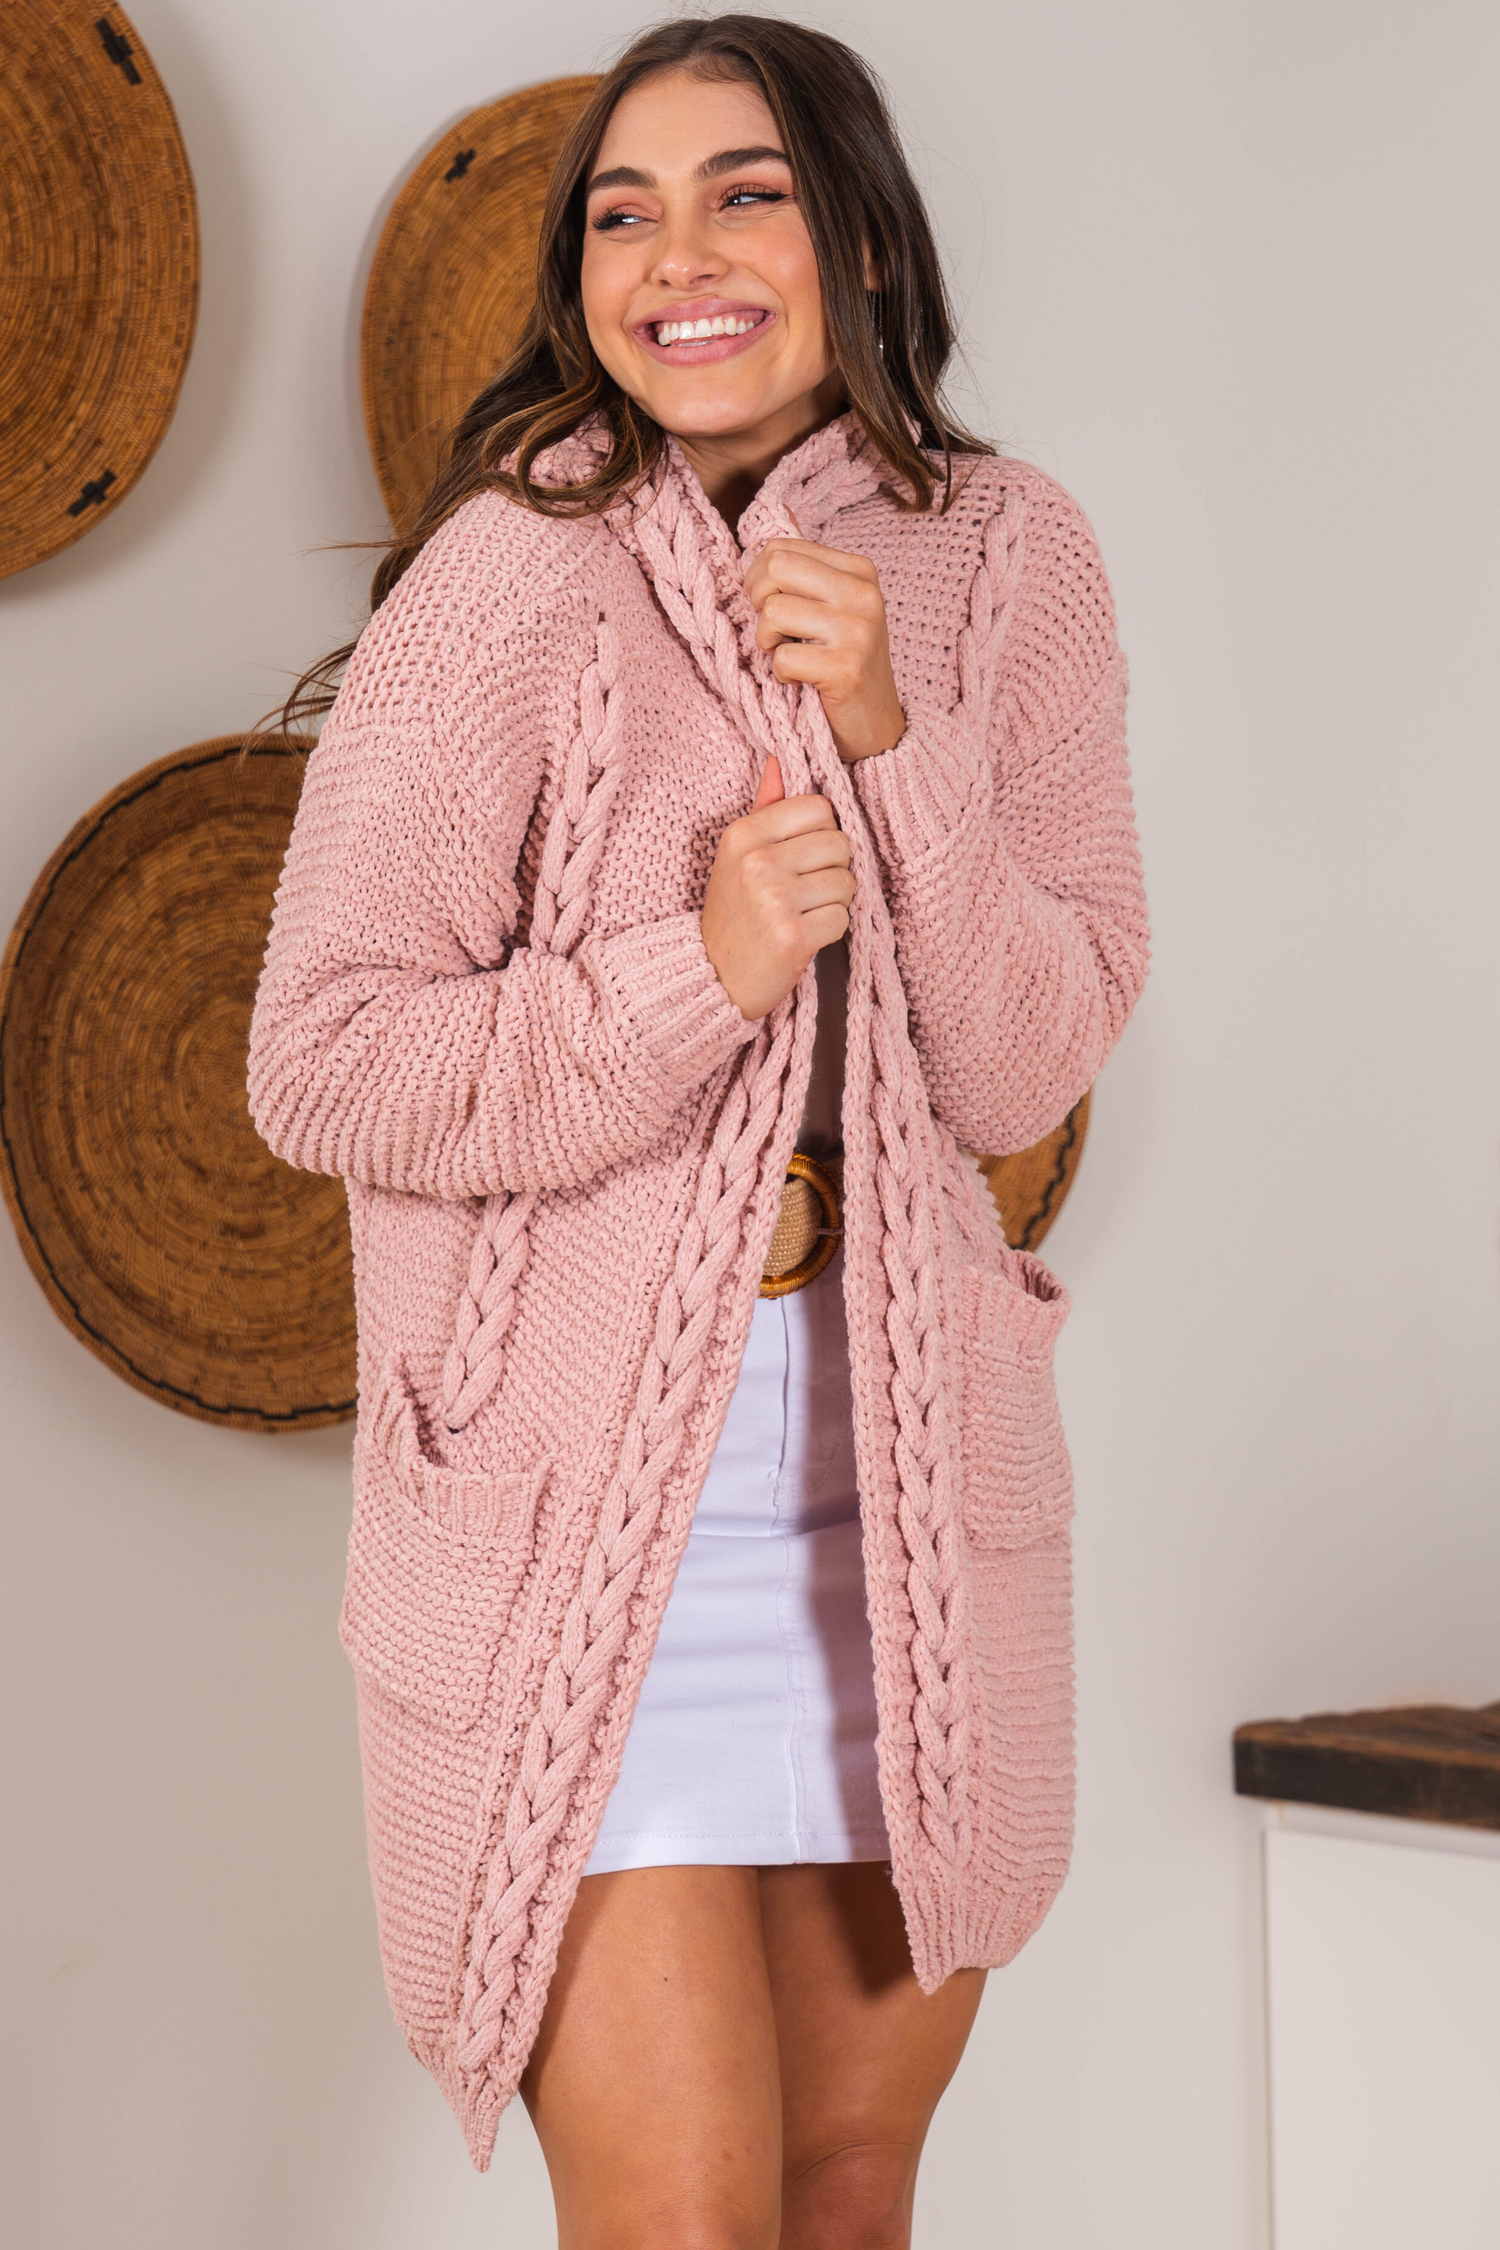 Toolara Cardigan - Thick Cable Knit Hooded Cardigan with Pocket in Pink